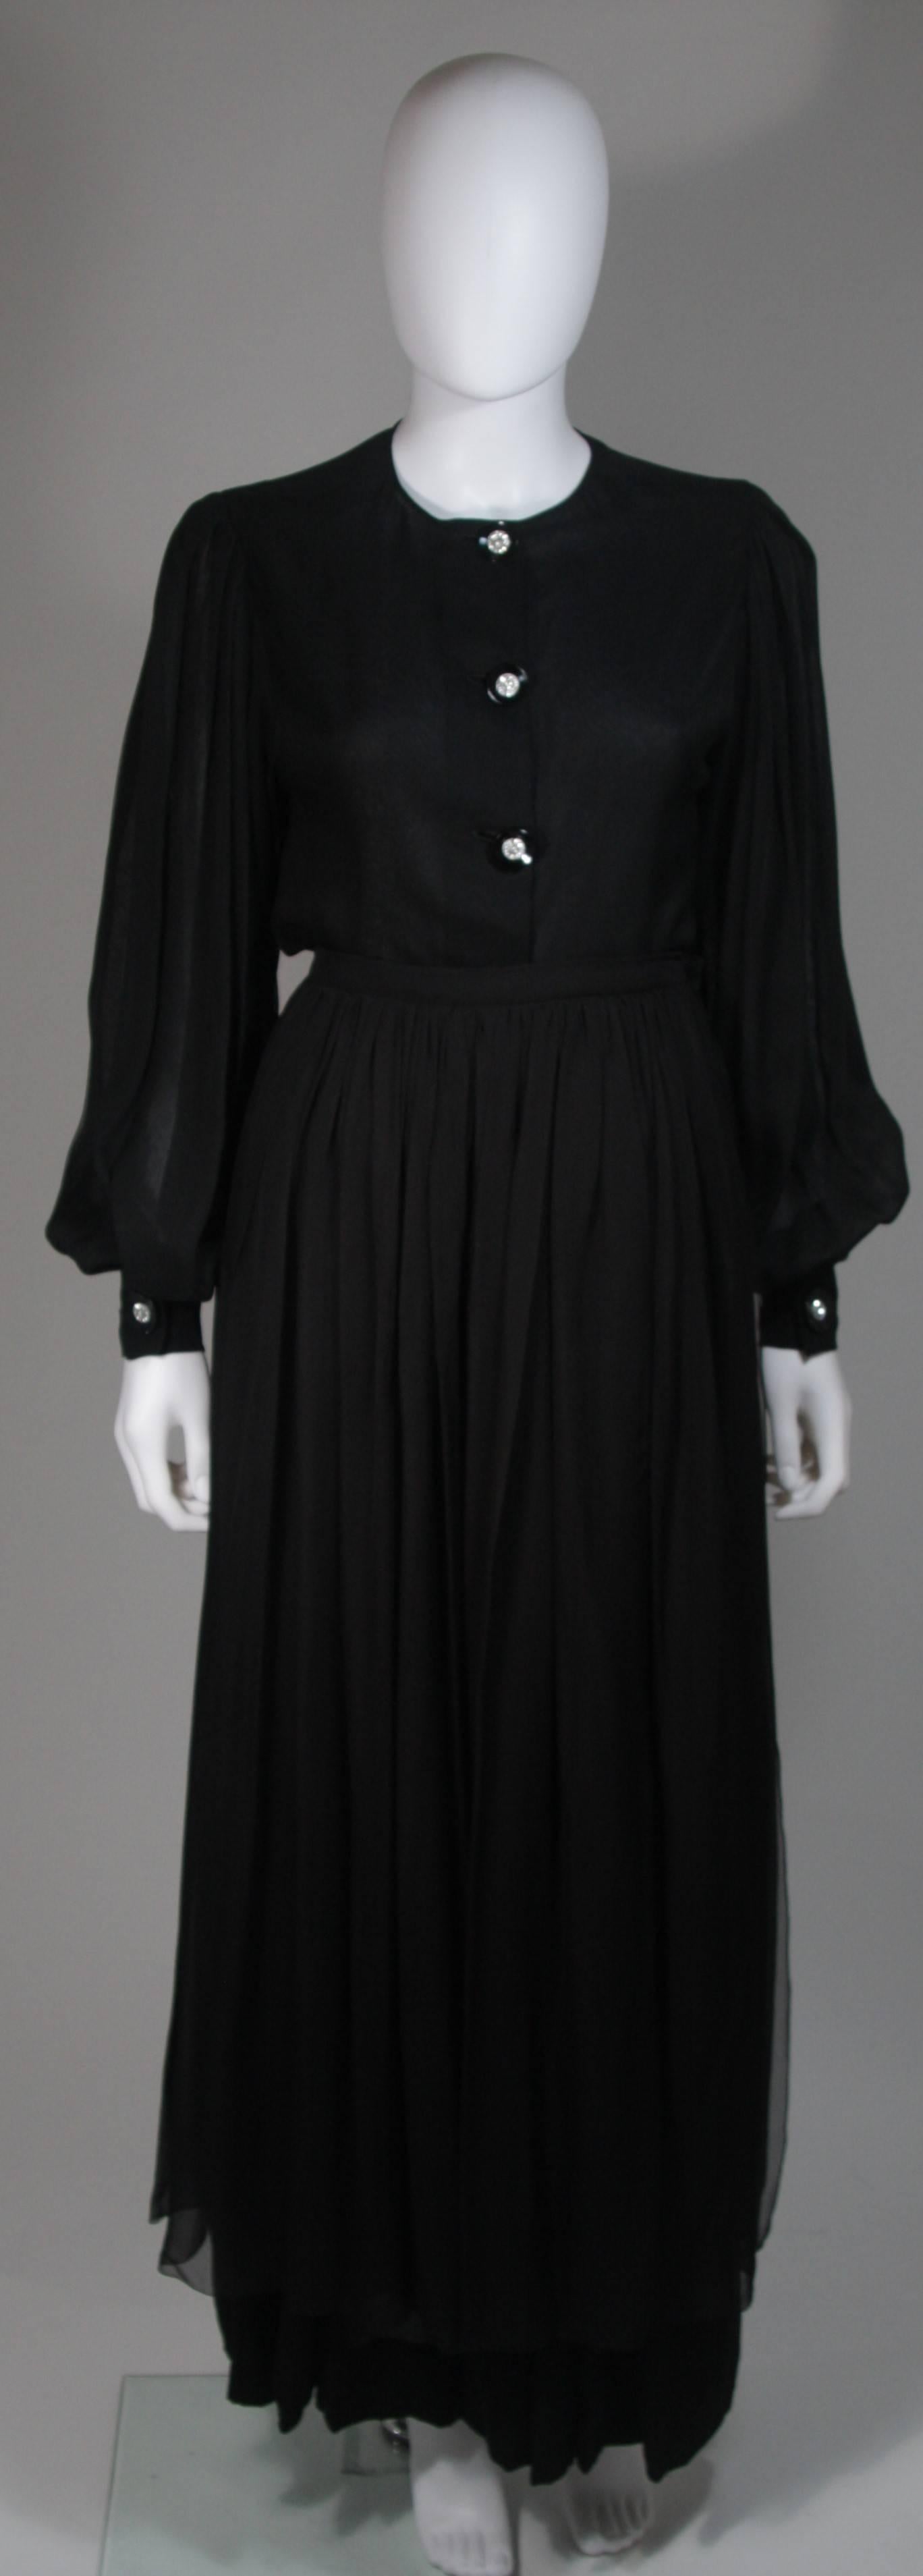 This Galanos  evening ensemble is composed of a black silk chiffon. Features three pieces. The blouse has rhinestone button closures. There is a semi sheer over skirt with a side closure. The pants feature a wide leg with side closure. In excellent